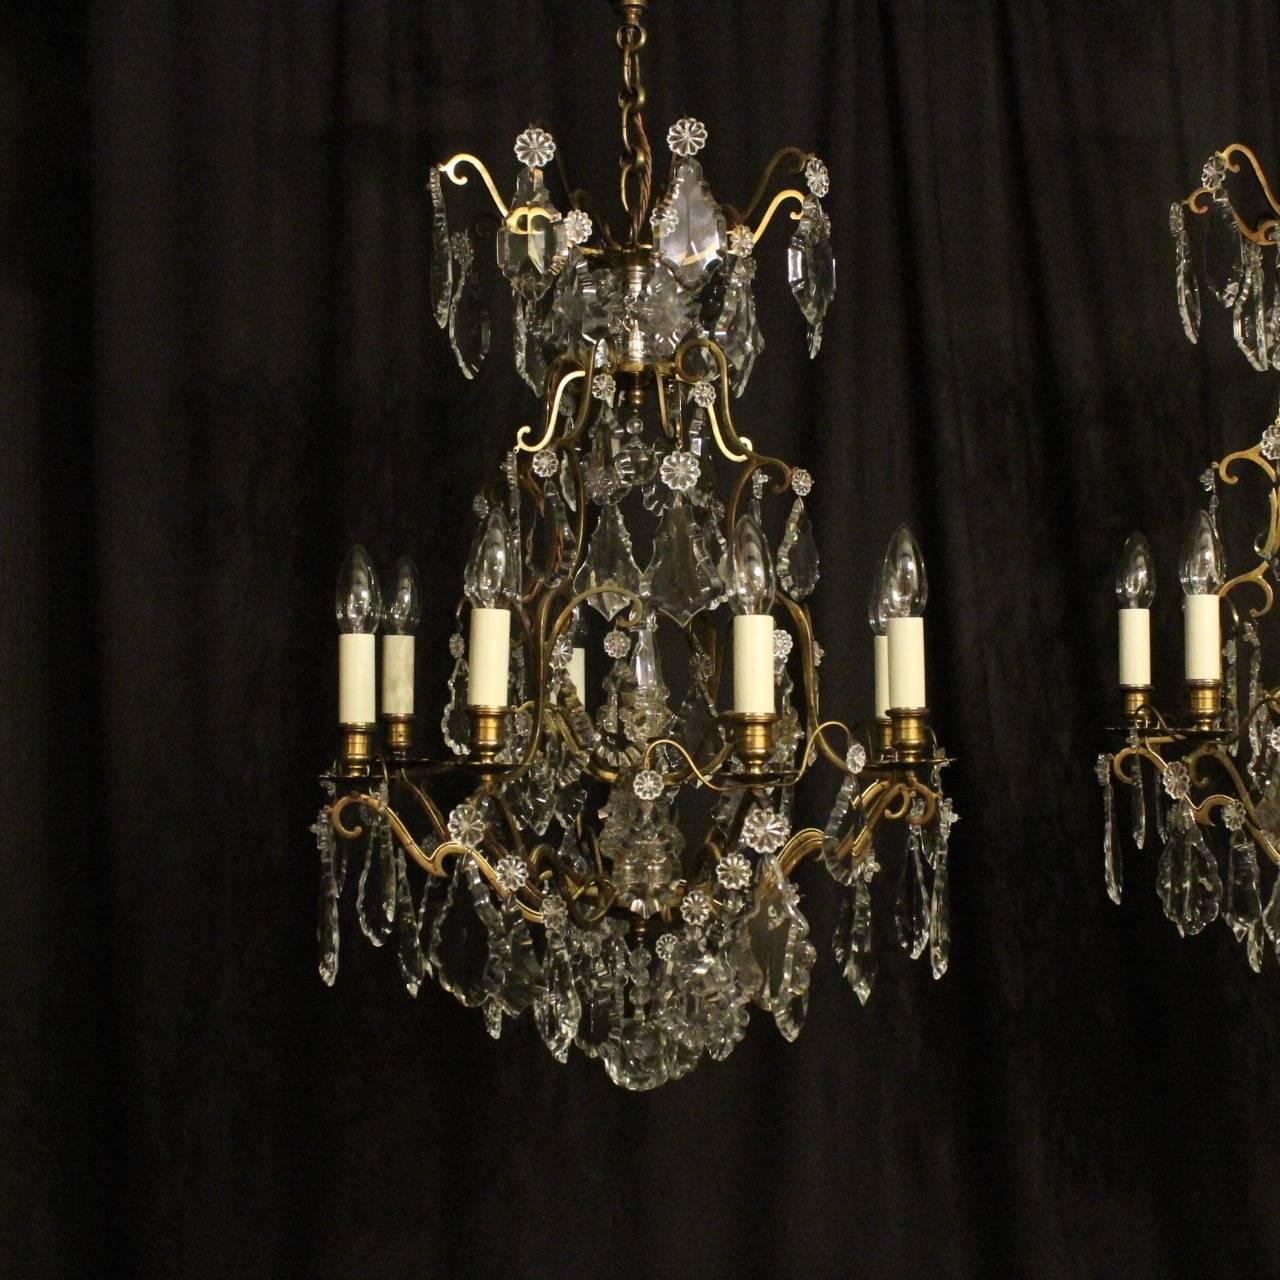 A French pair of gilded brass and crystal eight-light birdcage form antique chandeliers, the square gauge scrolling arms with floral bobeche drip pans and bulbous candle sconces, issuing from a cage form interior with a large prismatic spike and an